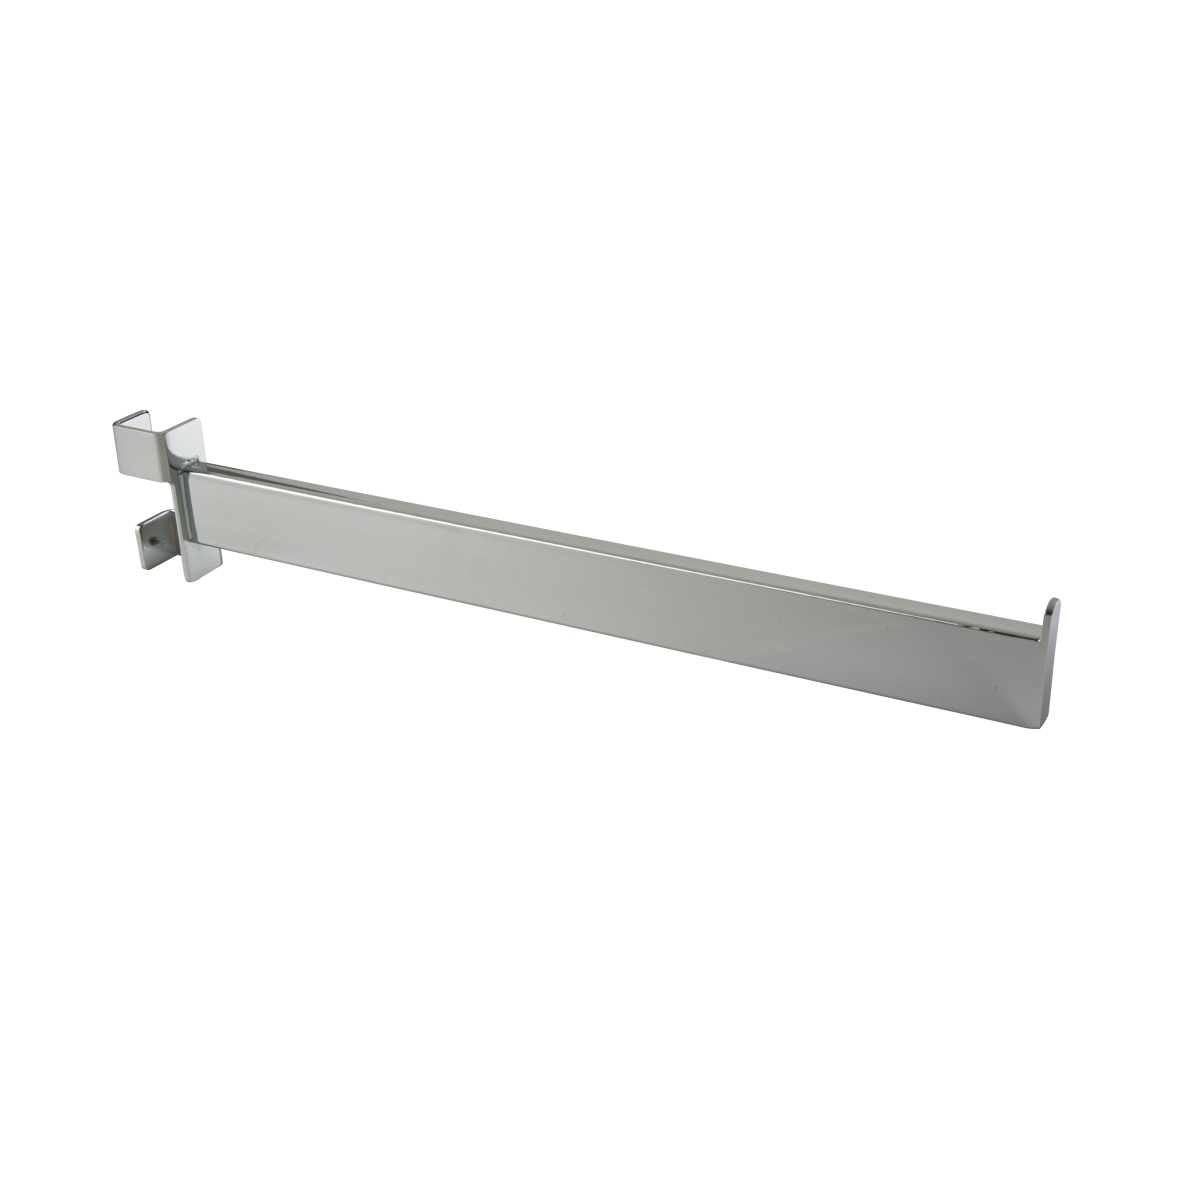 Picture of Econoco TV-17 16 in. Twist-On Straight Arm for Square Tubing Rack - Chrome